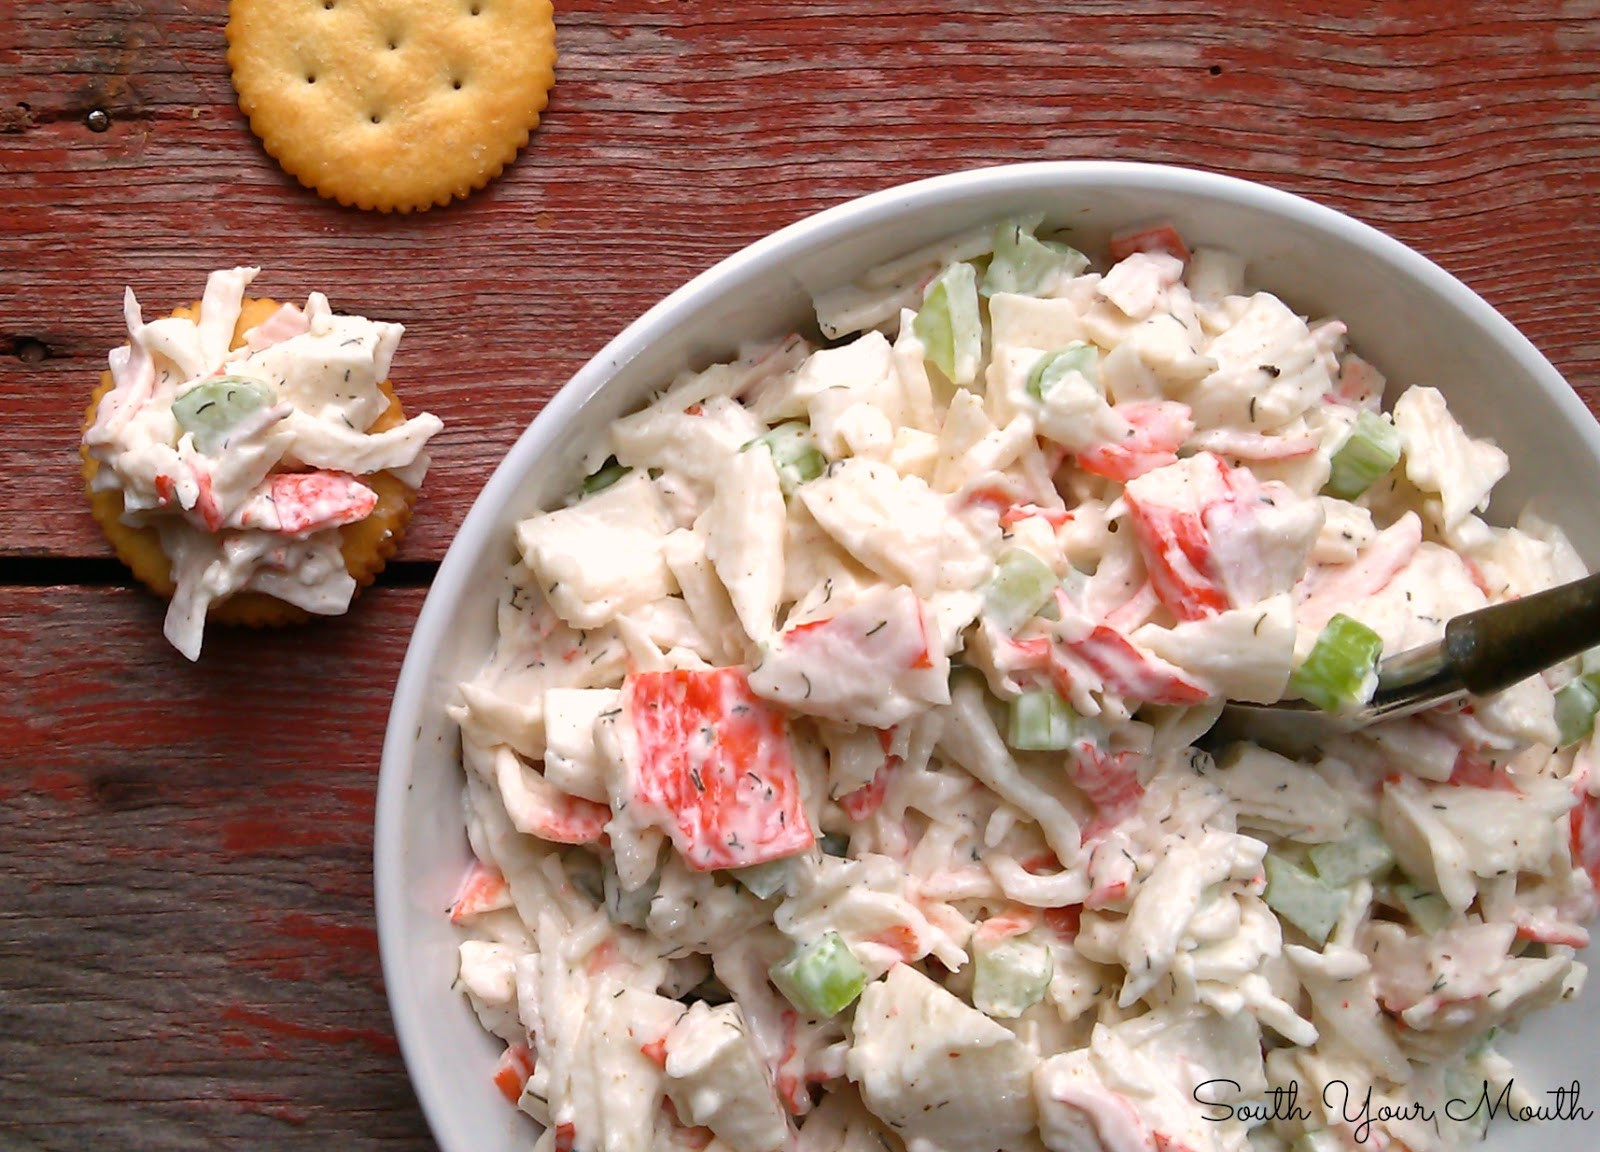 Seafood Salad With Shrimp And Crab
 South Your Mouth Seafood Salad